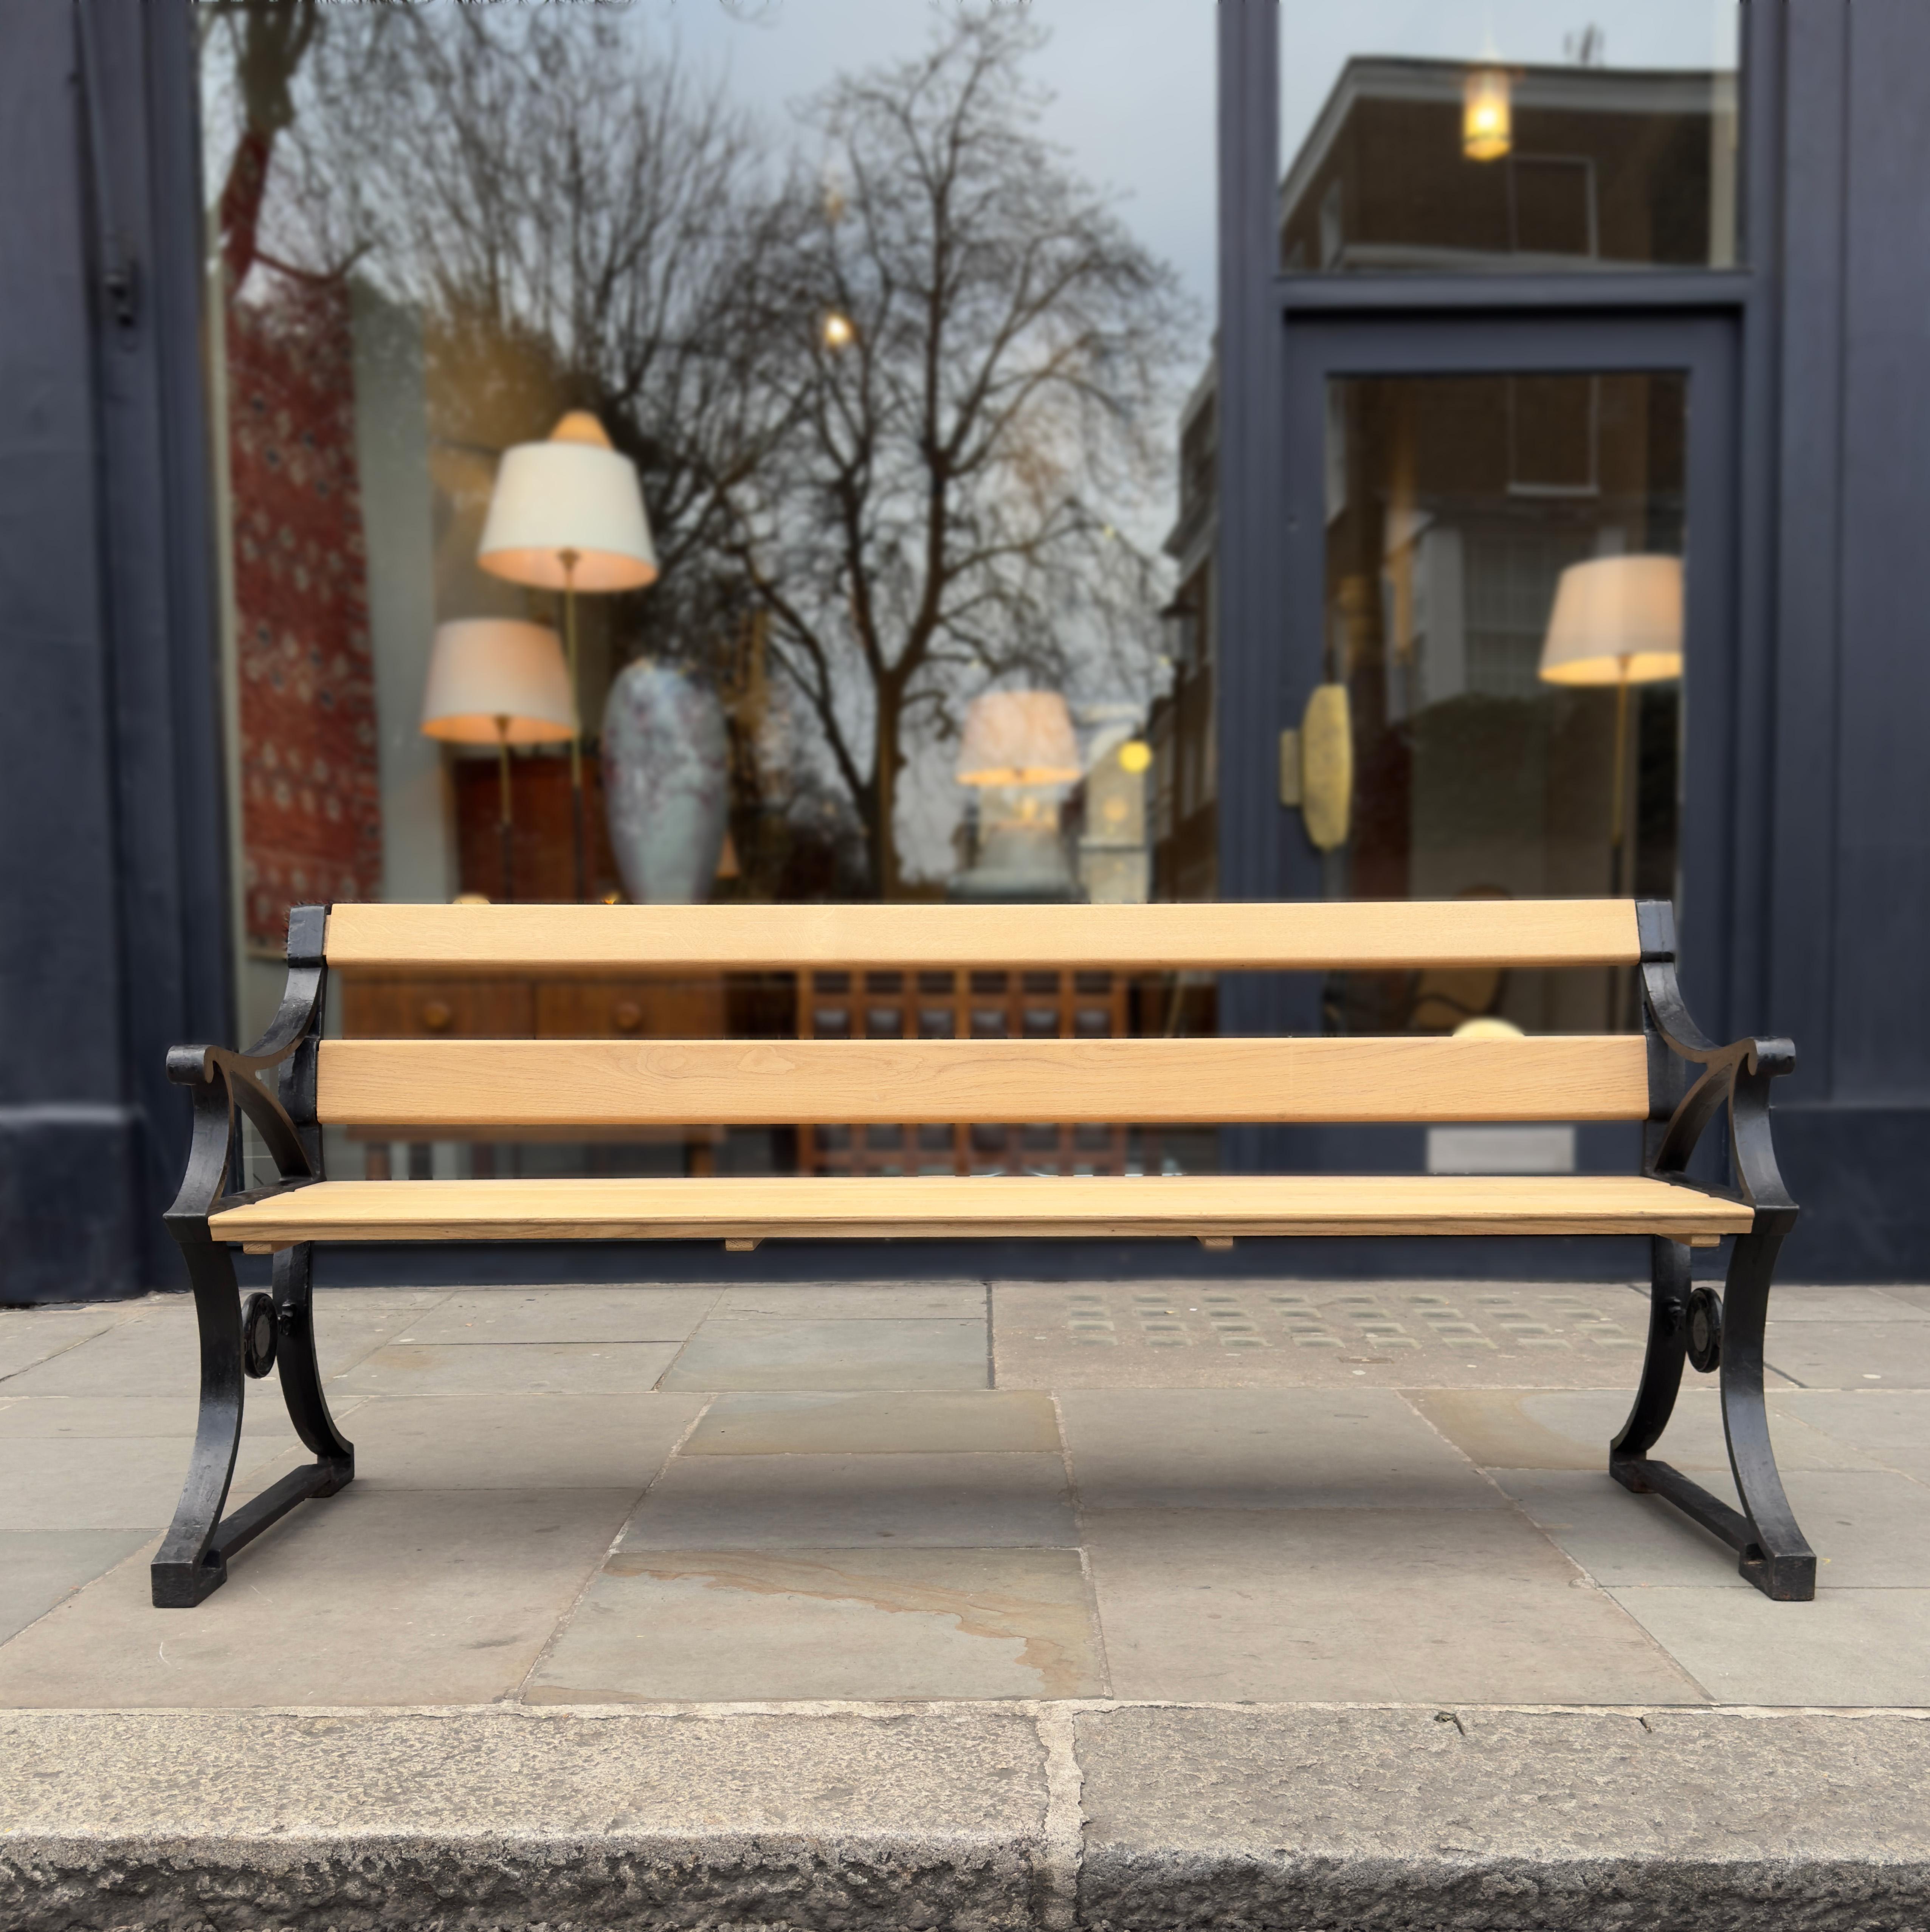 An original Nr. 3 Parkbänk designed by Folke Bensow for Näfveqvarns Bruk in the 1920s.

The cast iron ends to the bench show fine craftsmanship, with their design pulling away from their heavy medium. The lower half is decoratively braced with a